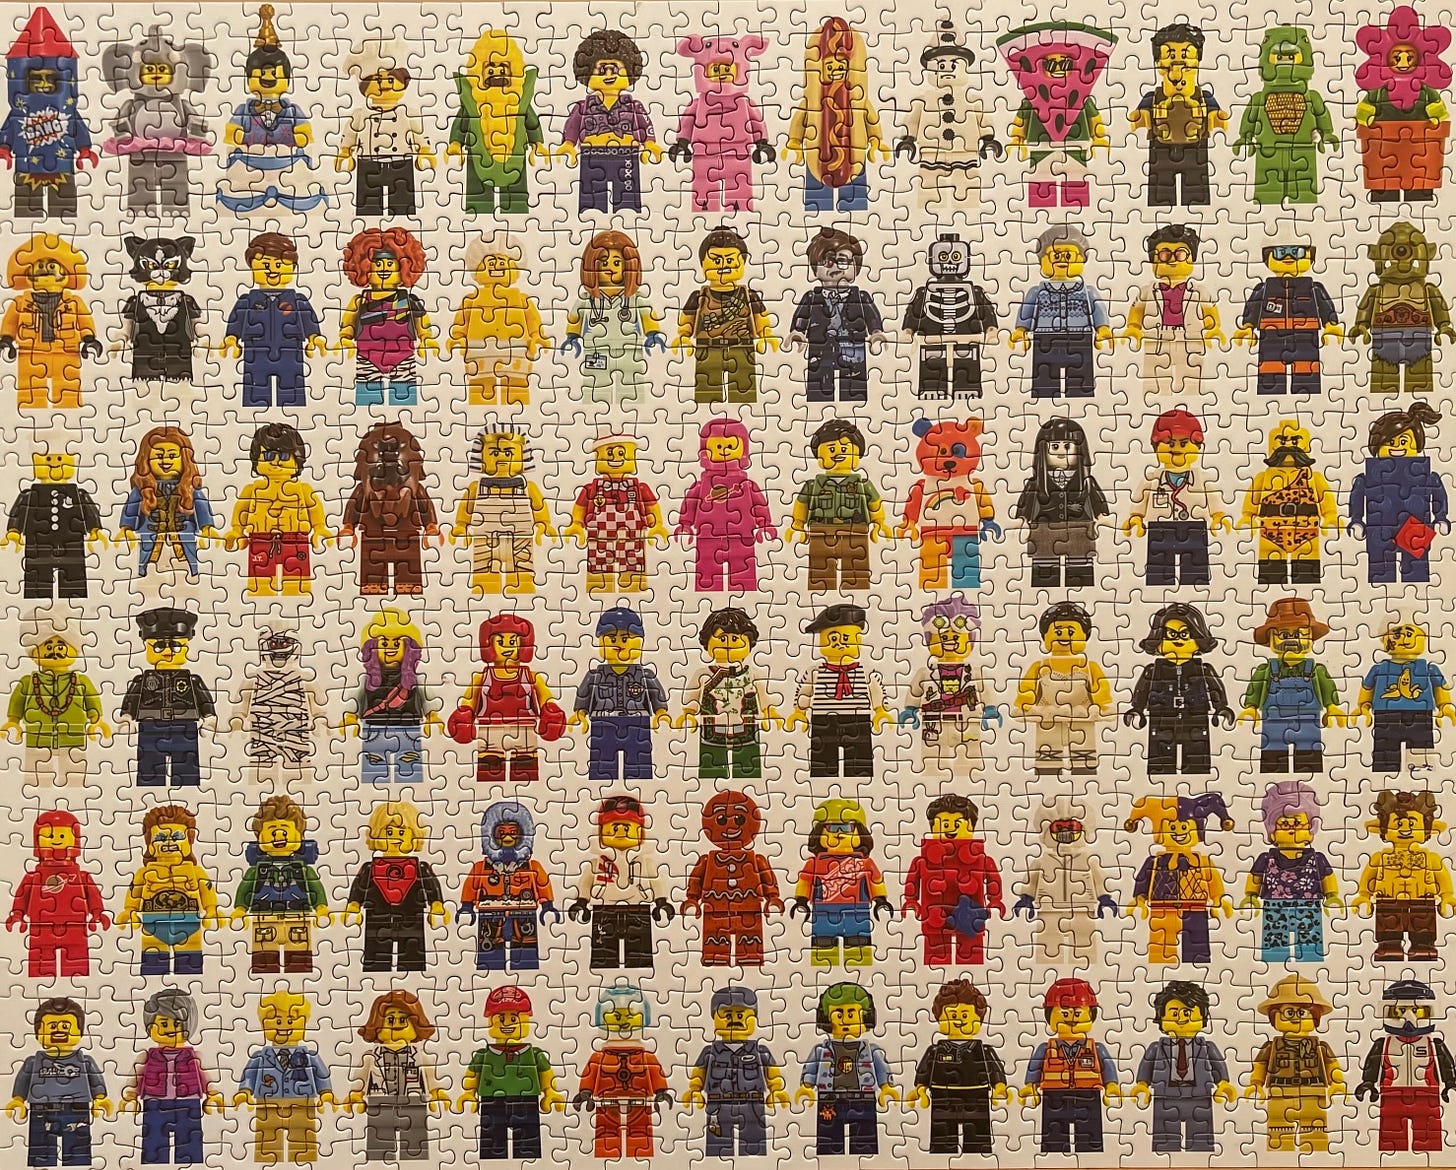 A picture of a 1000-piece puzzle picturing LEGO characters that I happened to finish some weekends ago.